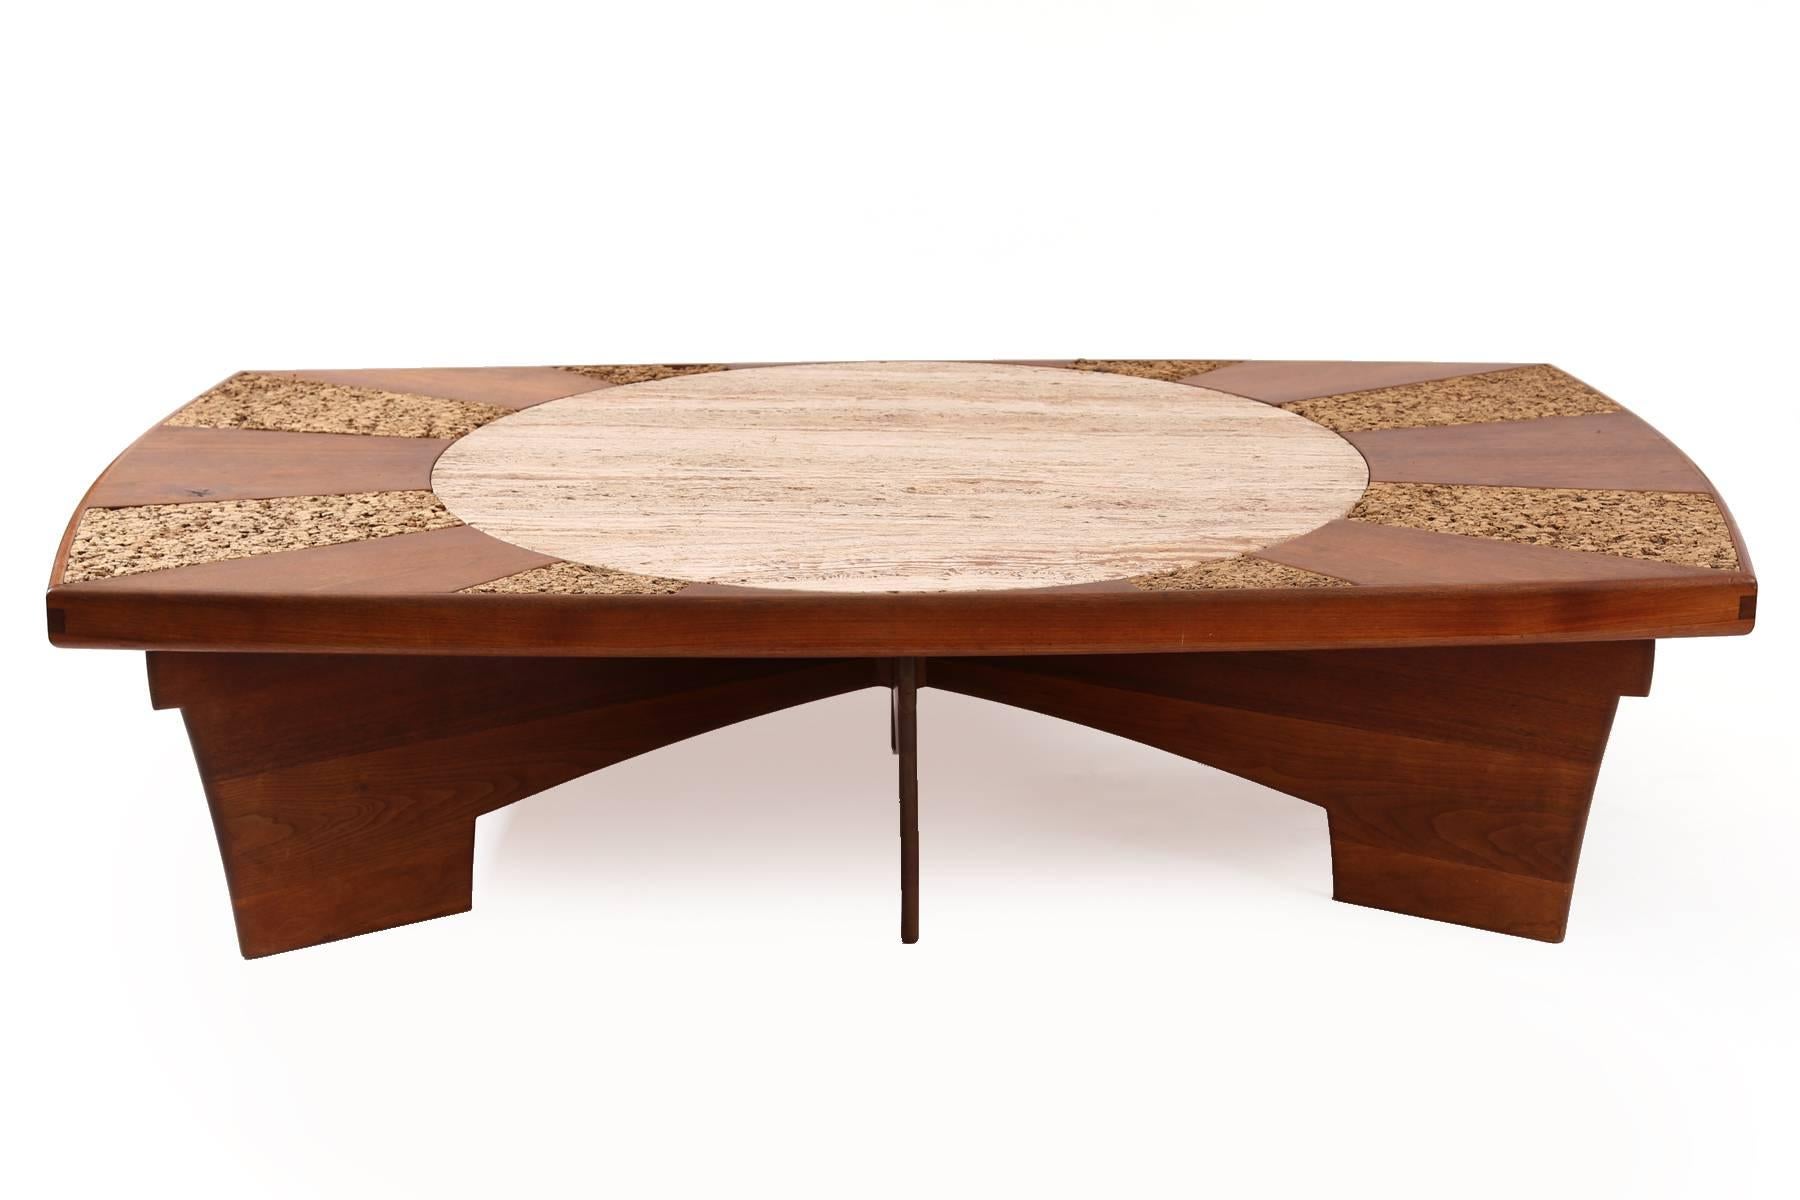 Large-scale custom walnut limestone and cork cocktail table, circa mid-1960s. This phenomenal example has sculptural solid walnut legs banding and top with alternating inset cork. The center is a beautifully grained limestone.